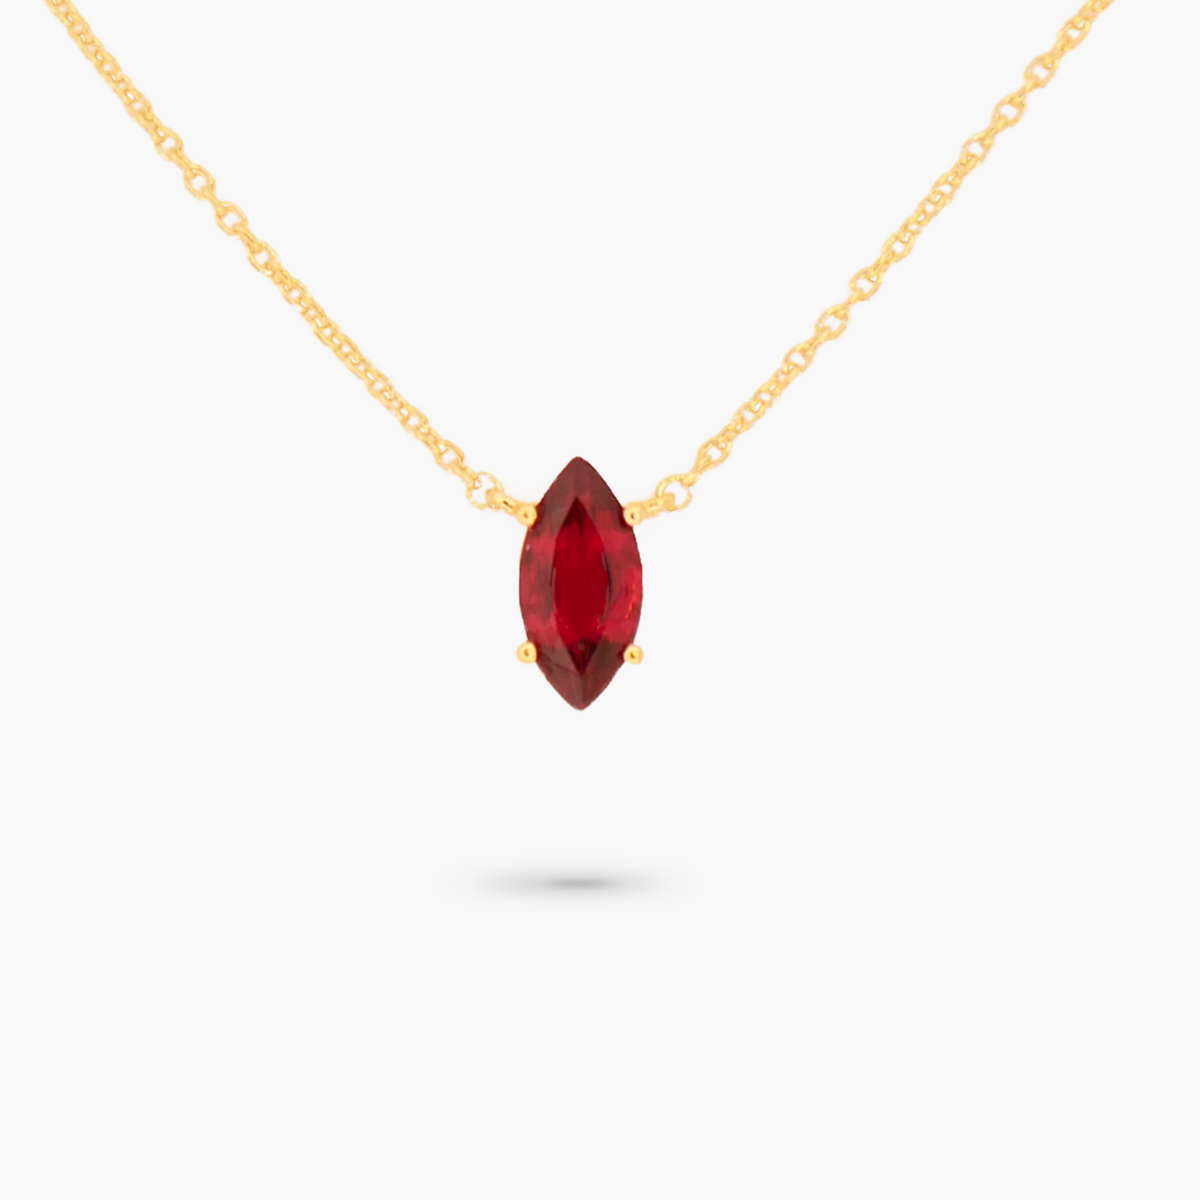 Amare Wear July Marquise Birthstone Necklace Ruby